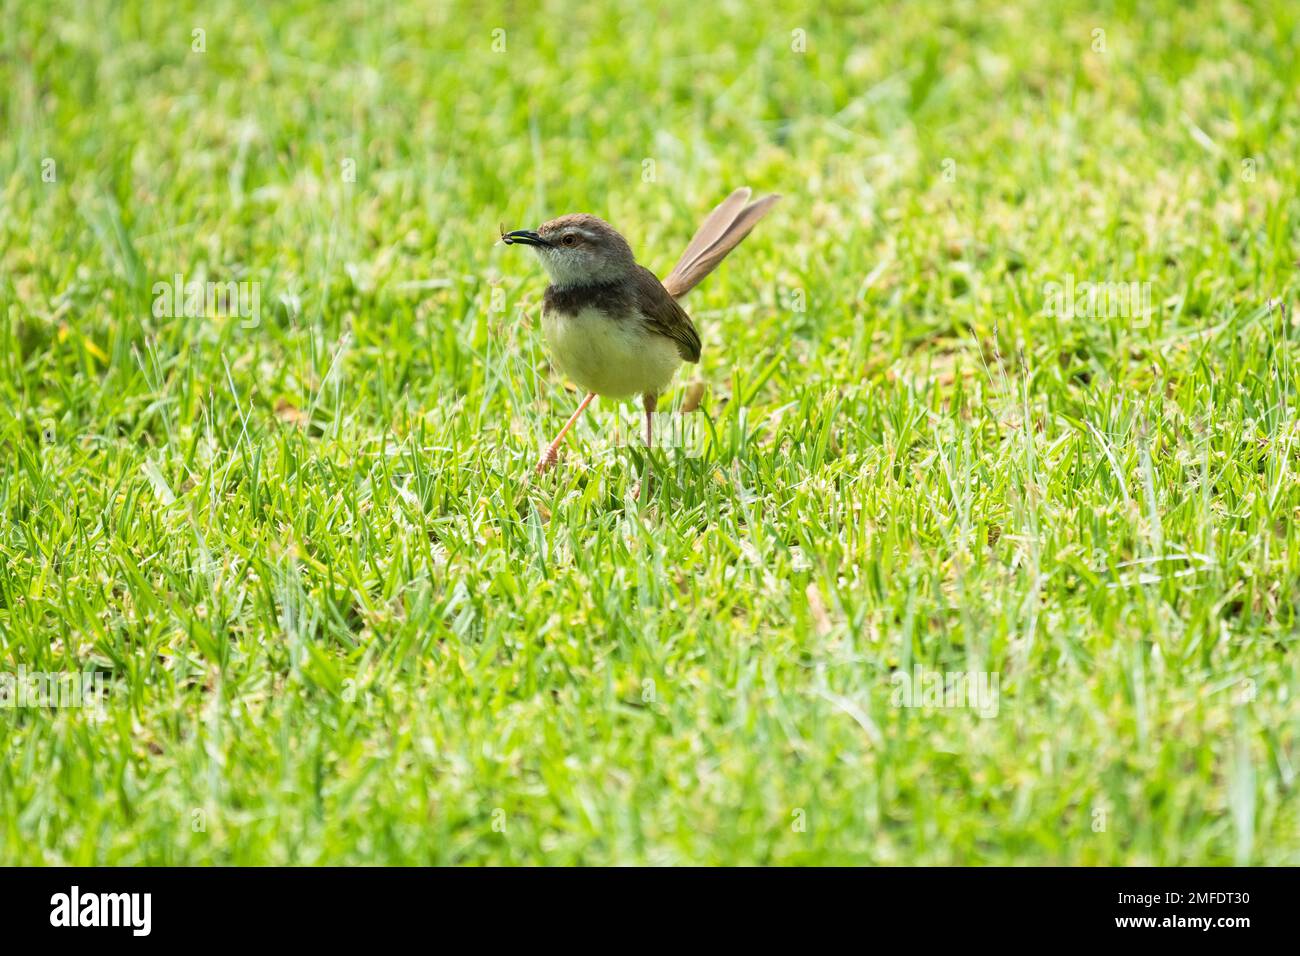 Black chested prinia (Prinia flavicans) female bird closeup in breeding plumage with an insect in her beak while foraging in grass in South Africa Stock Photo